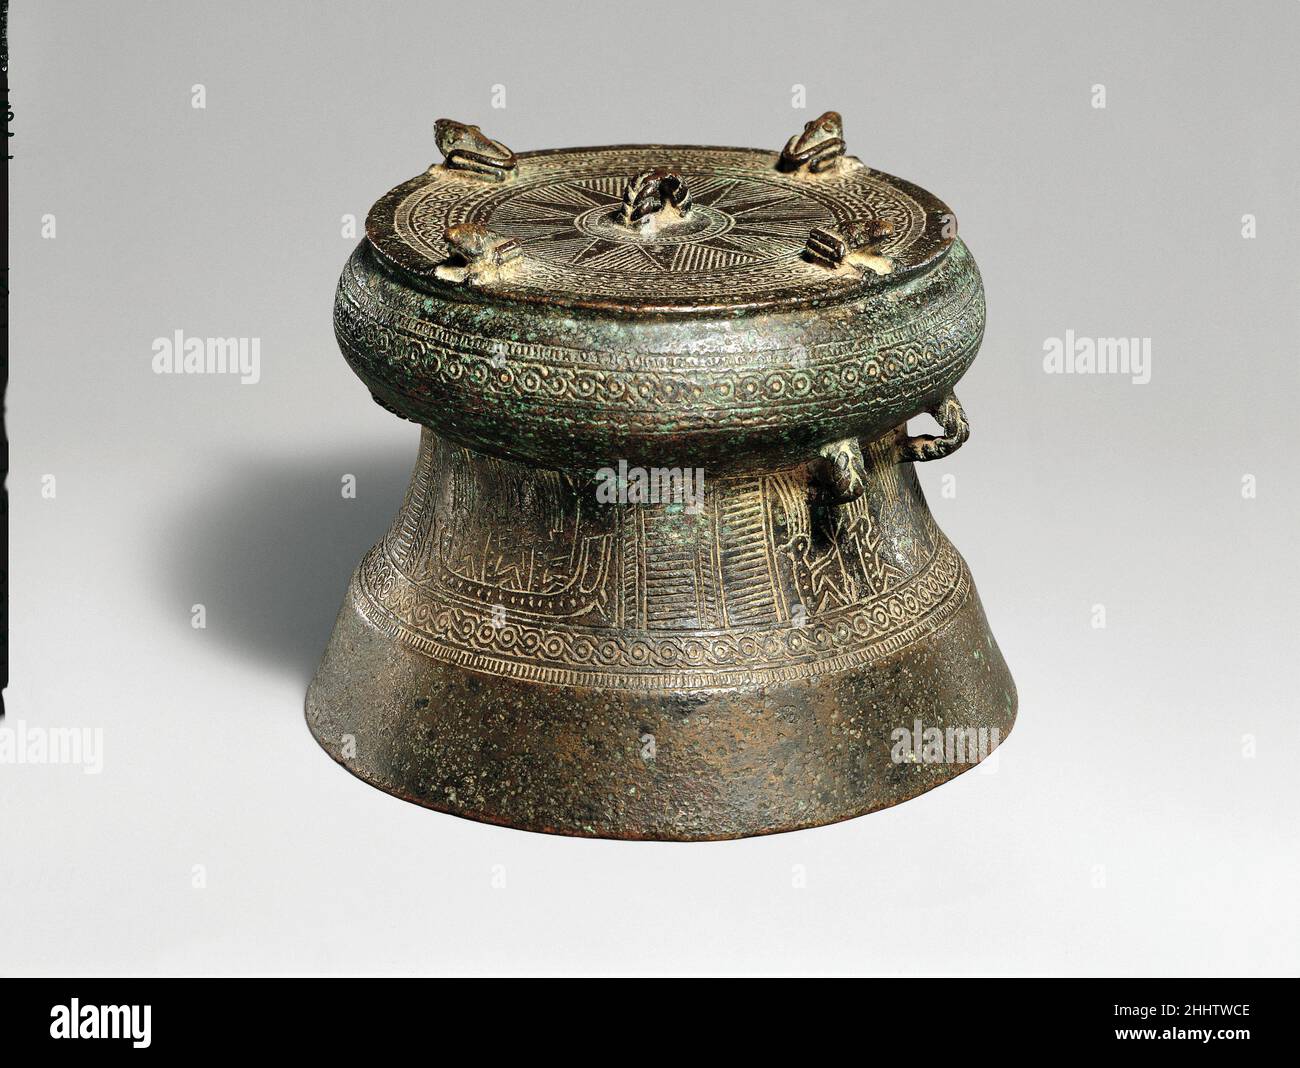 Miniature Drum with Four Frogs ca. 500 B.C.–A.D. 300 Vietnam Ranging in height from a few inches to over six feet, up to four feet in diameter, and often of considerable weight, drums are the most widely dispersed products of the Dongson culture of northern Vietnam. Examples produced in Vietnam, in addition to works made locally, have been found in south China and throughout mainland and island Southeast Asia. The function of these drums, often found in burials, remains unclear. They may have been used in warfare, as political regalia, or as part of funerary and other ceremonial rites.. Miniat Stock Photo